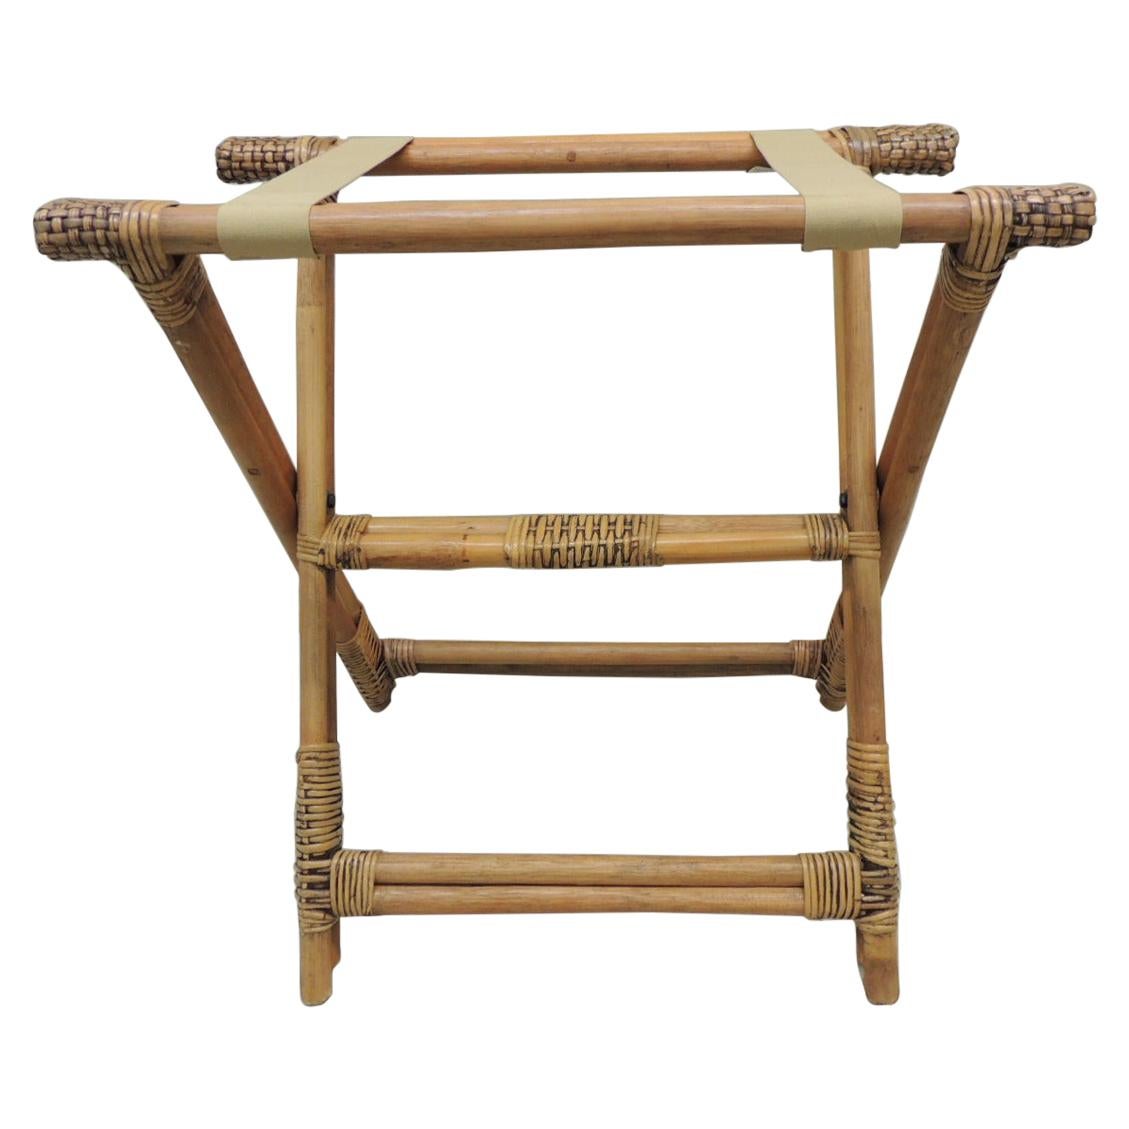 Bamboo and Rattan Woven Folding Luggage Stand